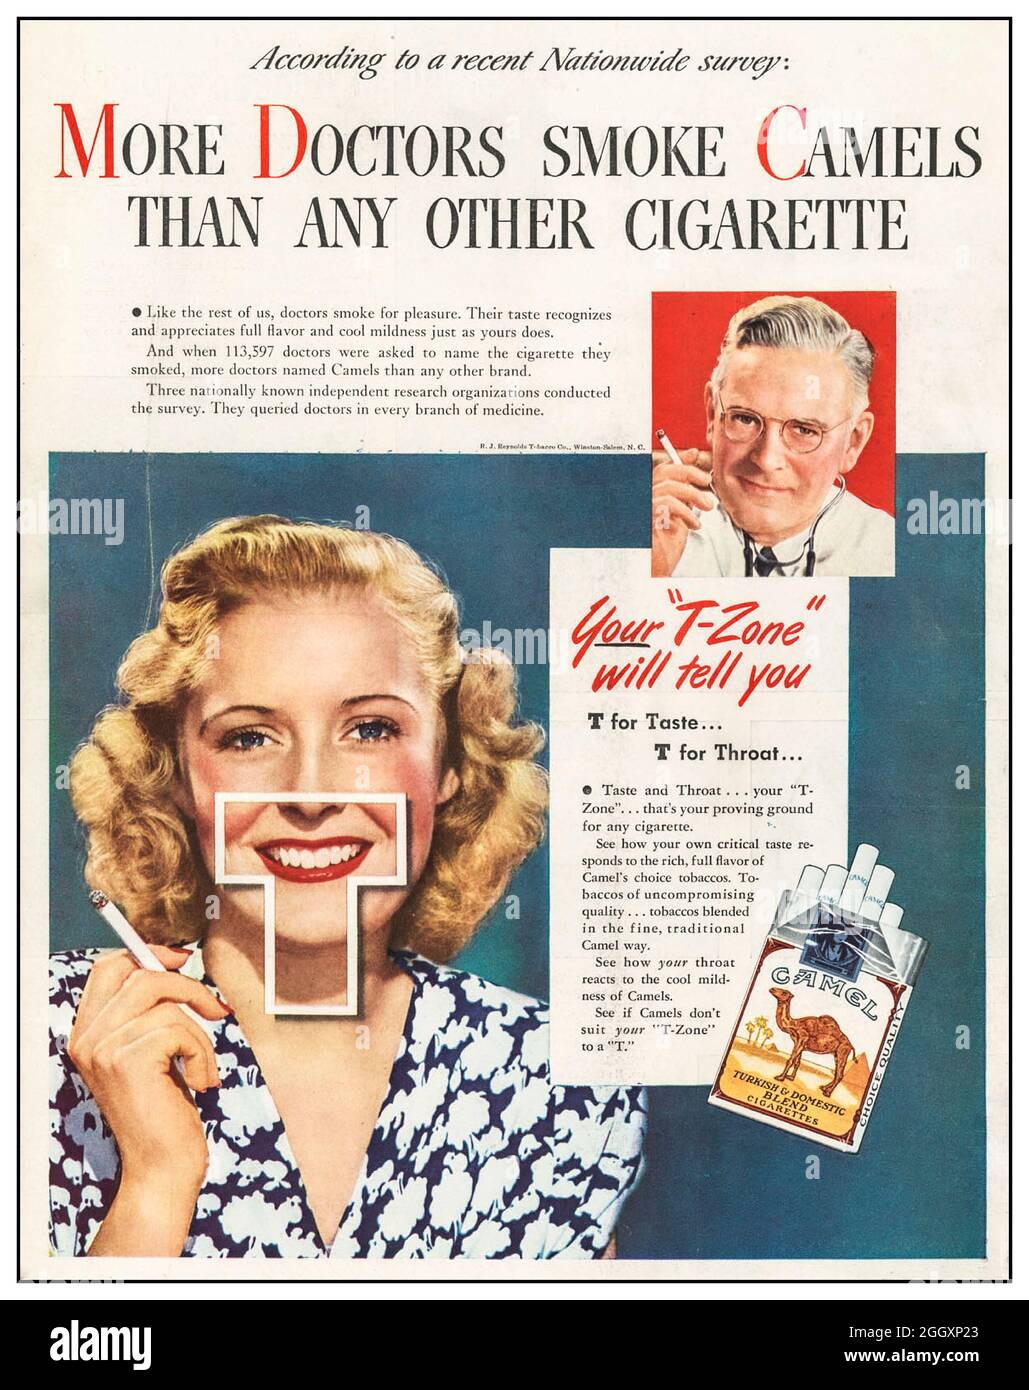 1950s Vintage Cigarette advertising for Camel Cigarettes with a product endorsement by a doctor. 'More doctors smoke Camels than any other cigarette' America USA Stock Photo